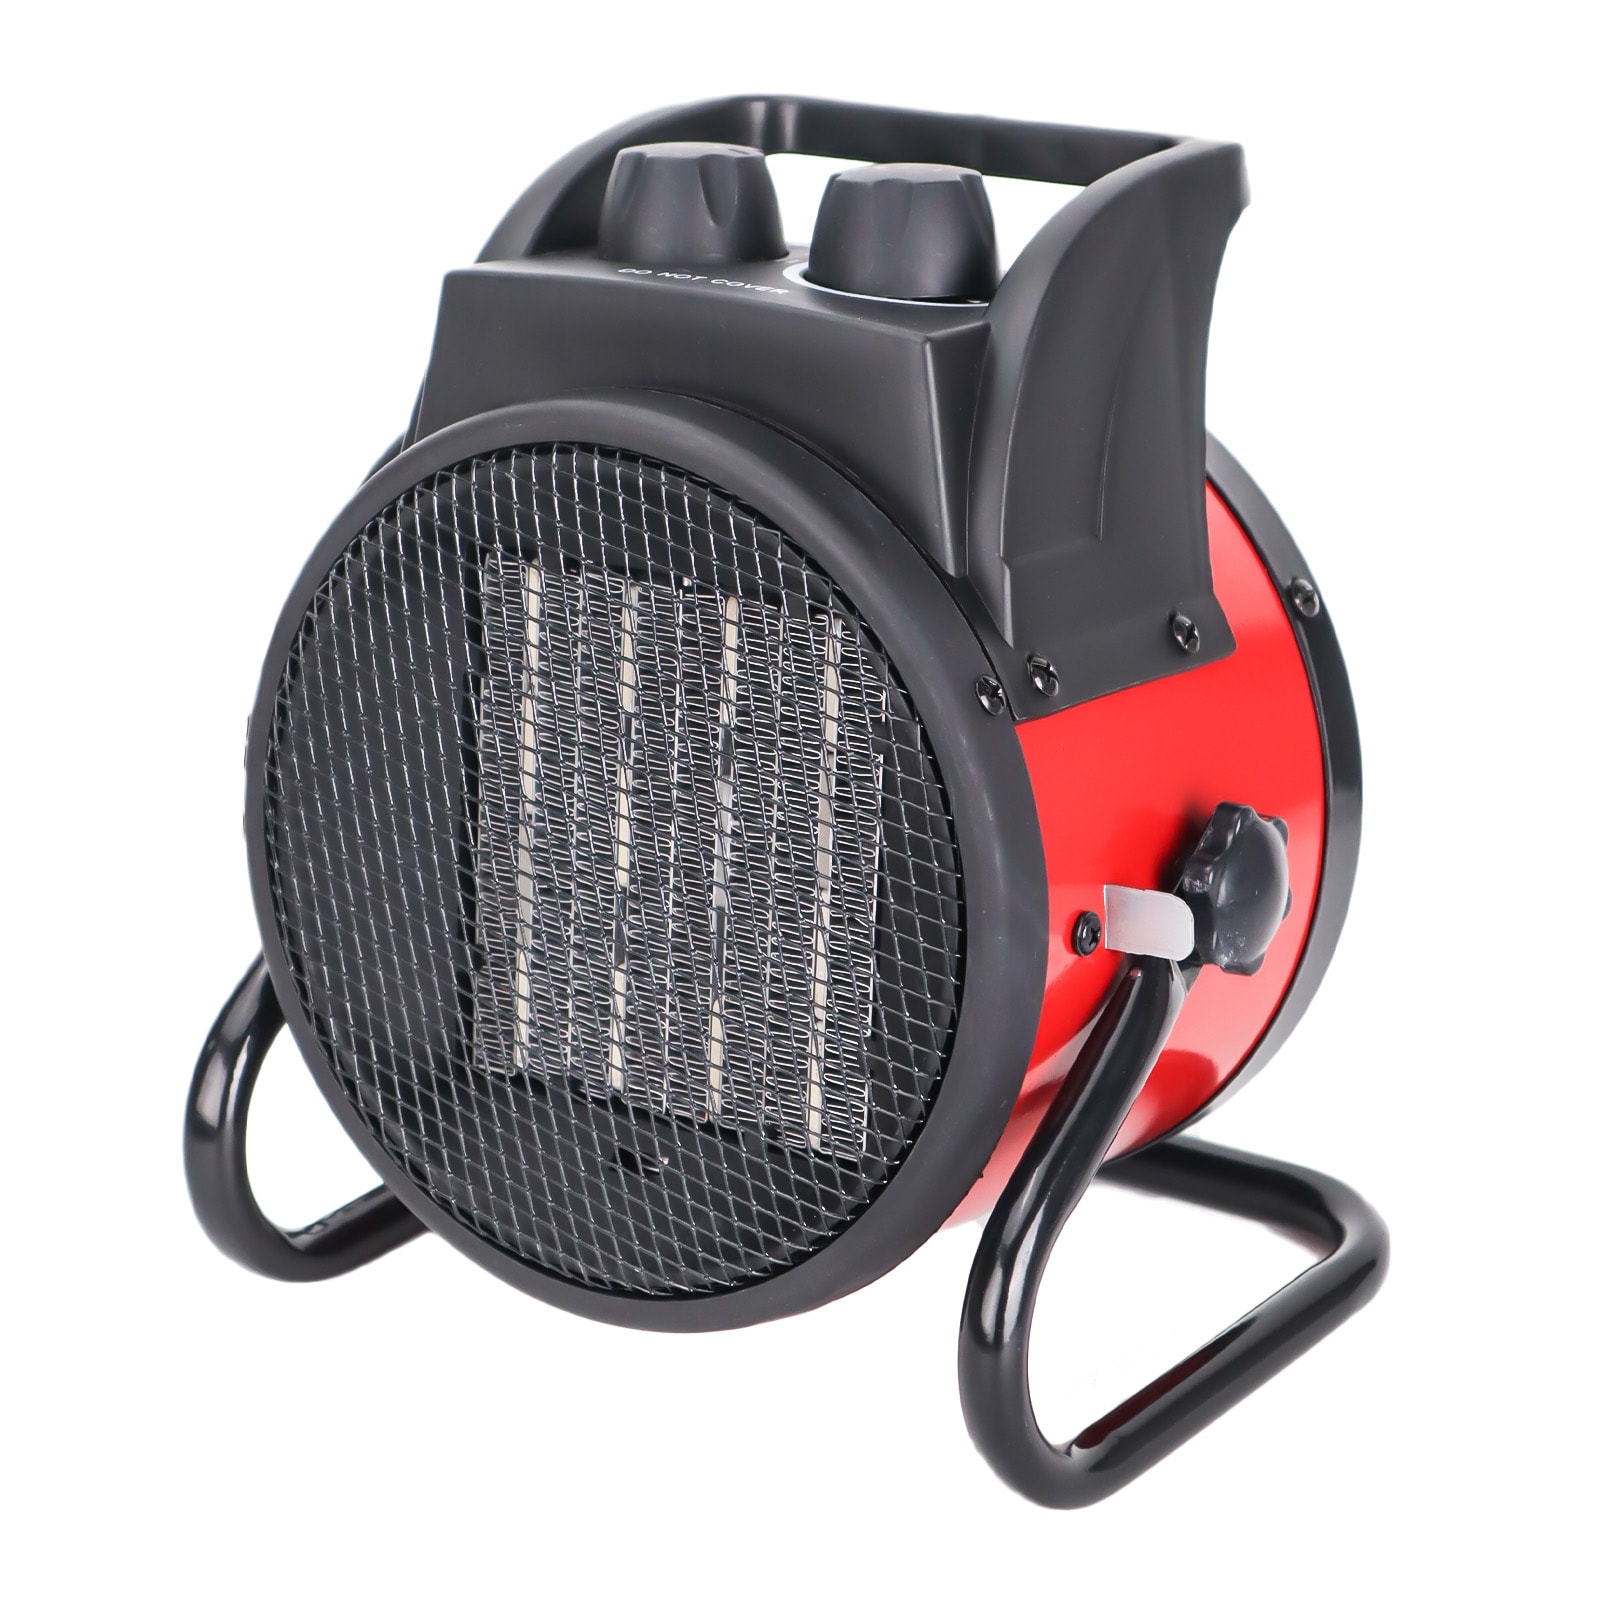 Save 10% on this personal space heater that could help you save on